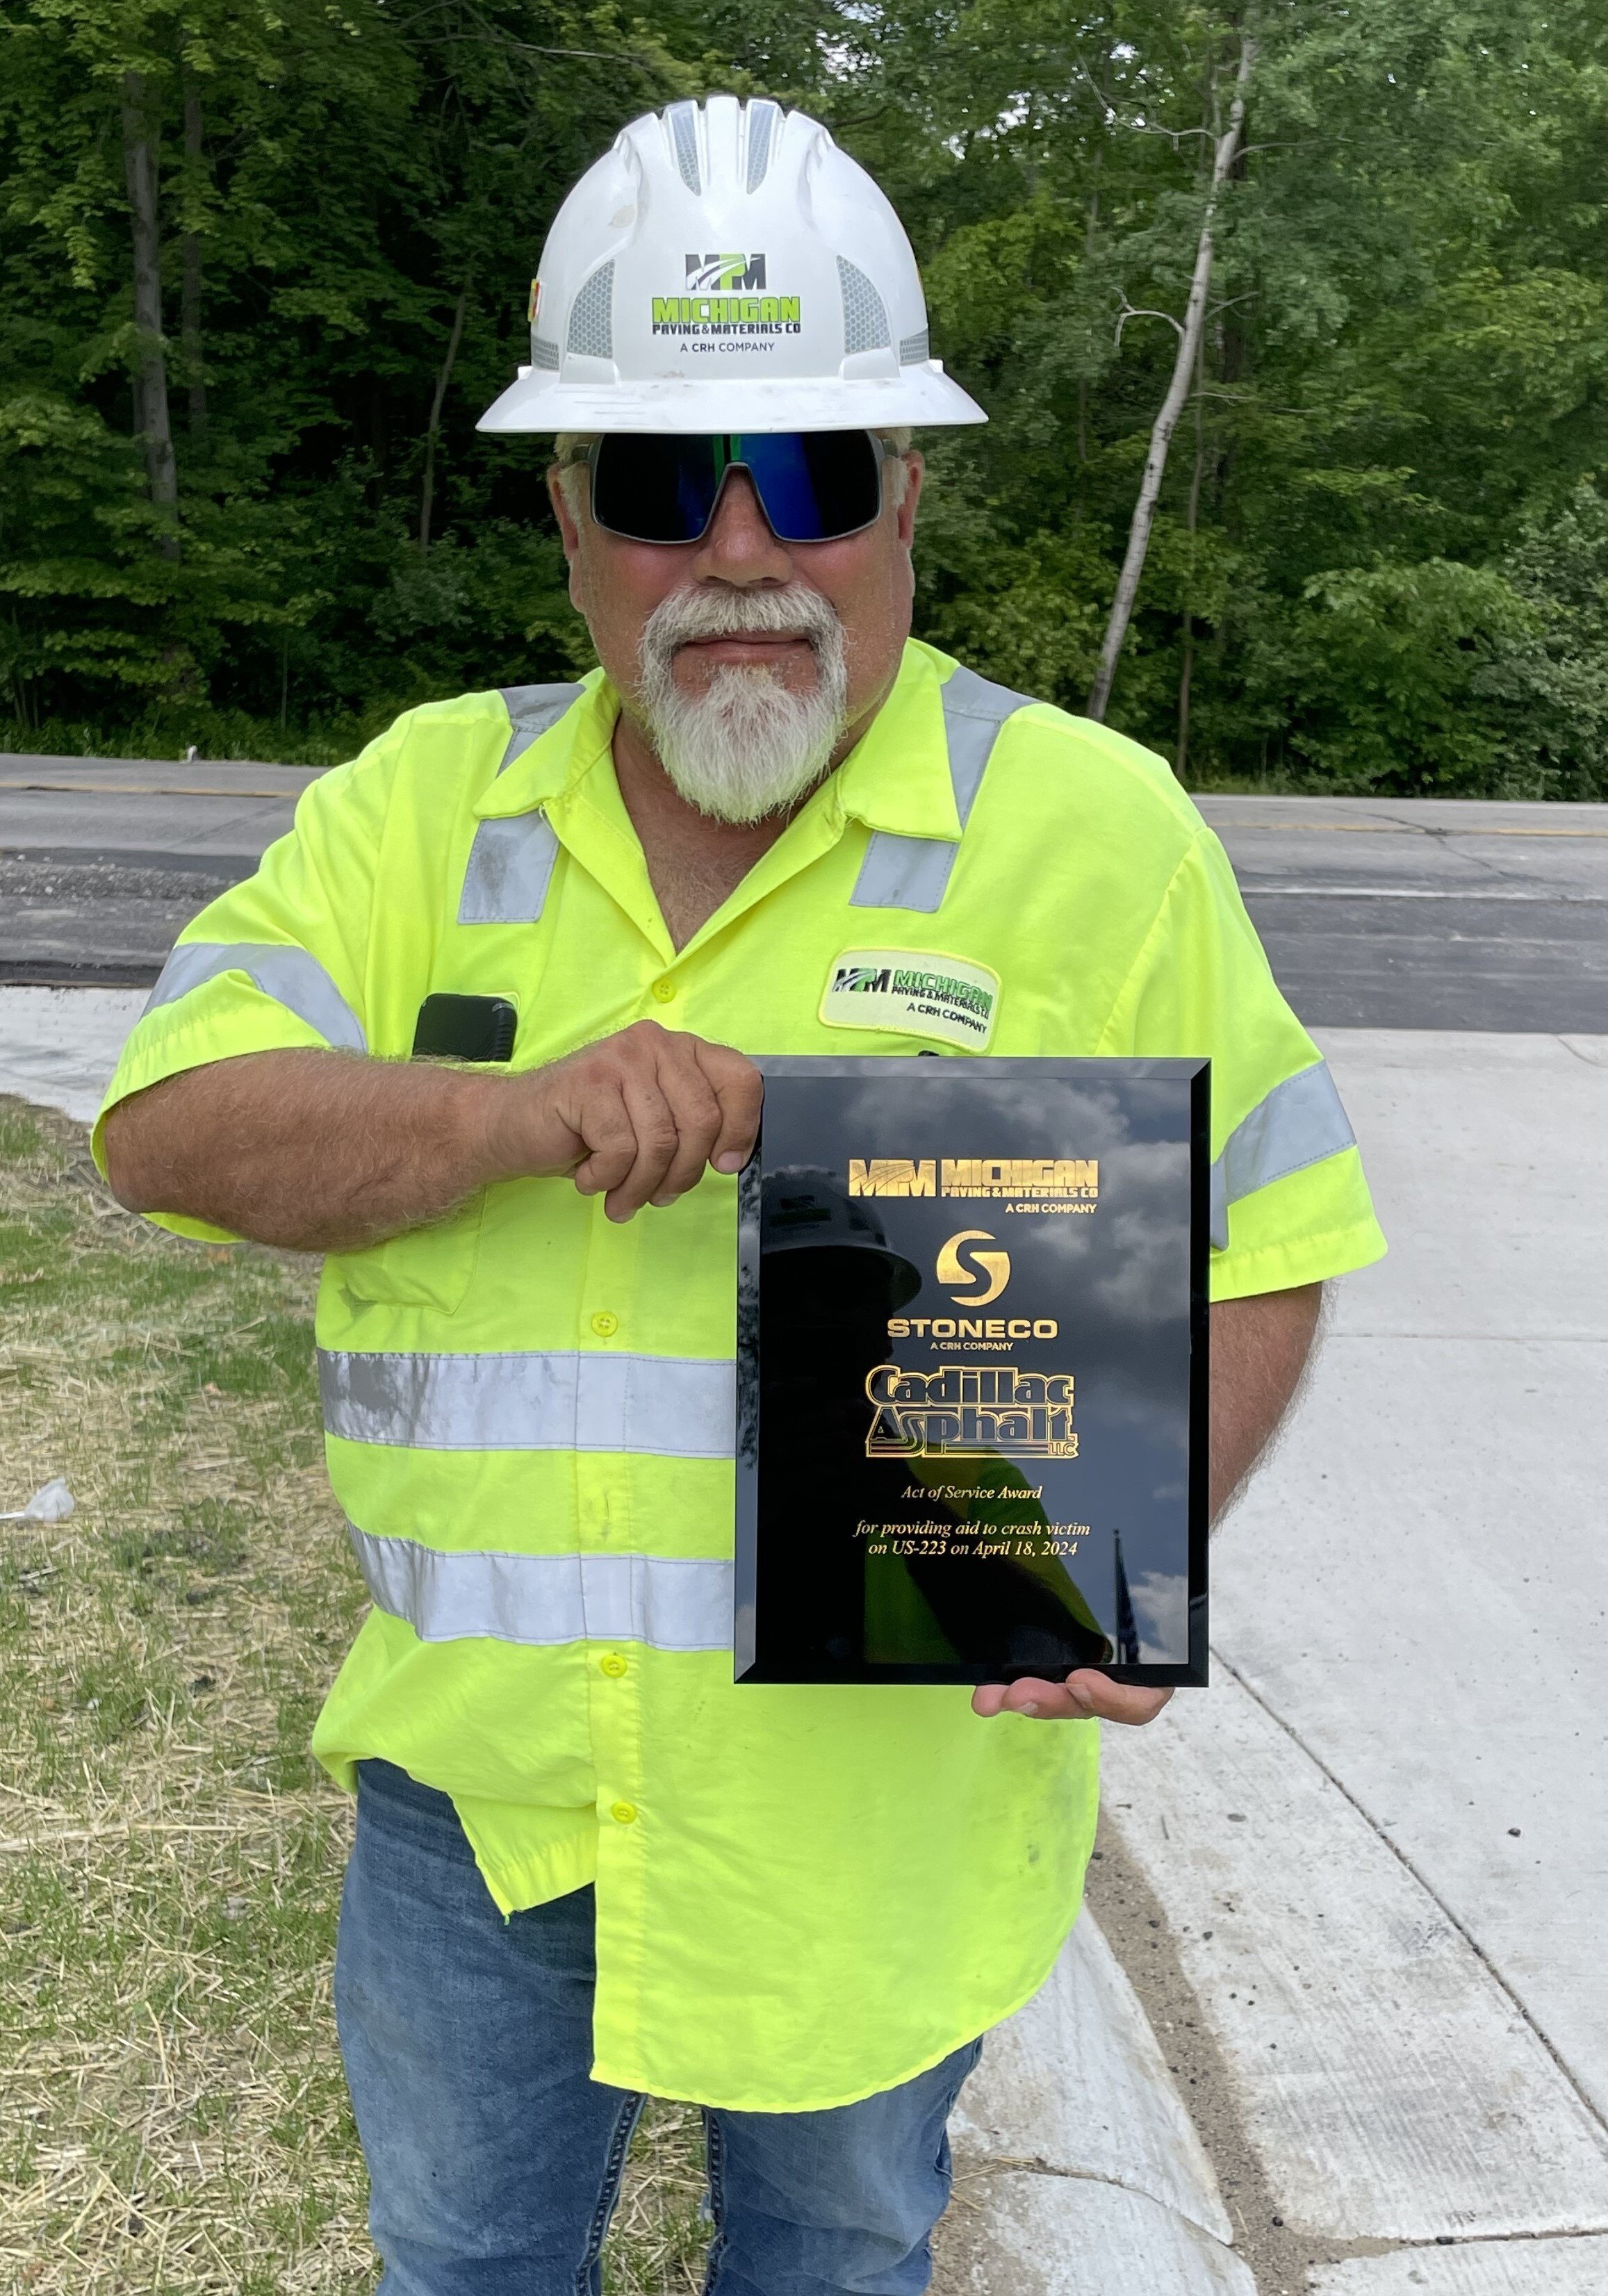 MPM traffic regulator presented with Act of Service award